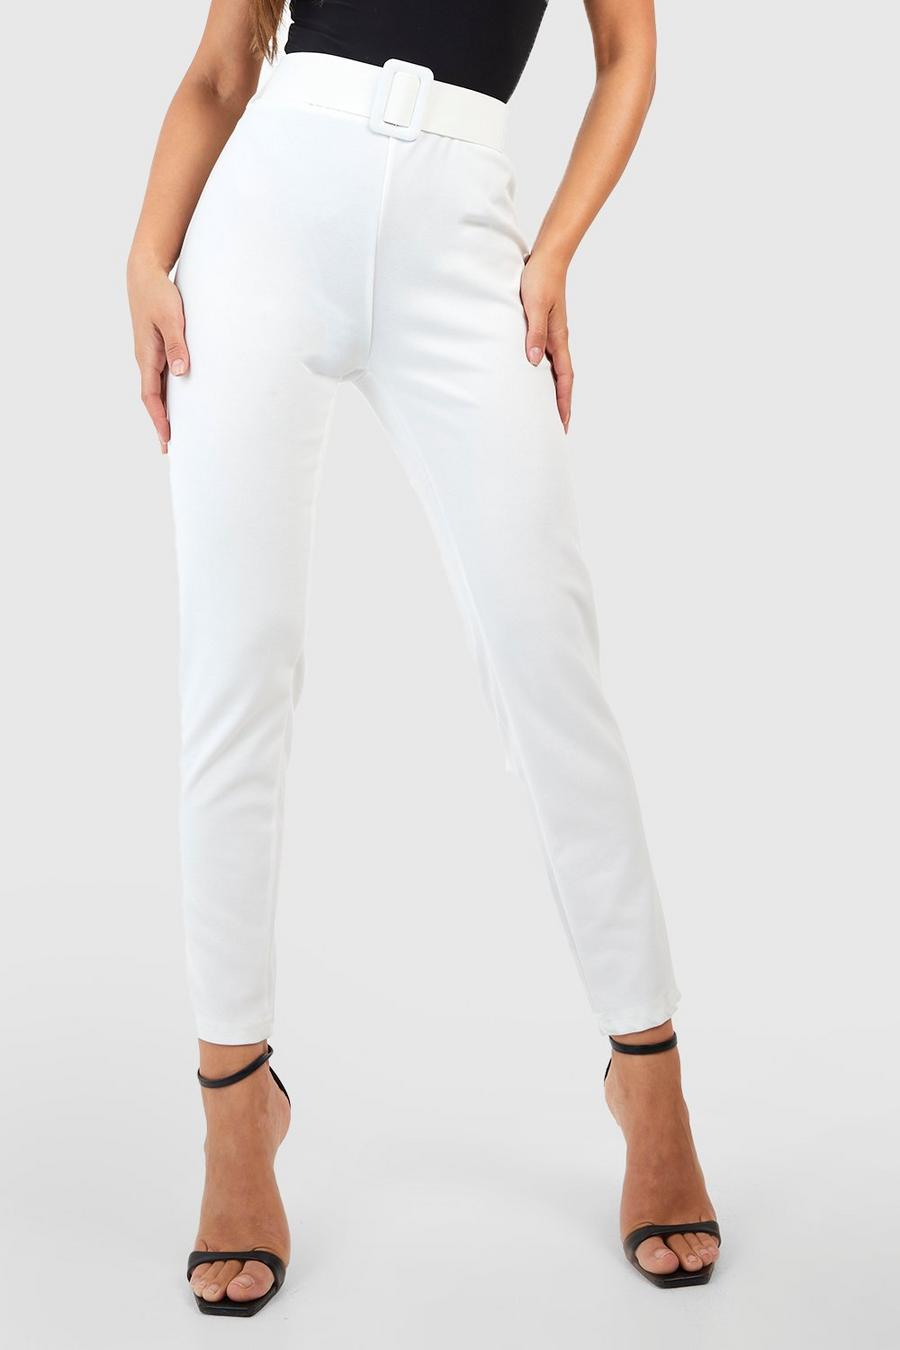 Ivory white High Waisted Buckle Belted Cigarette Trousers